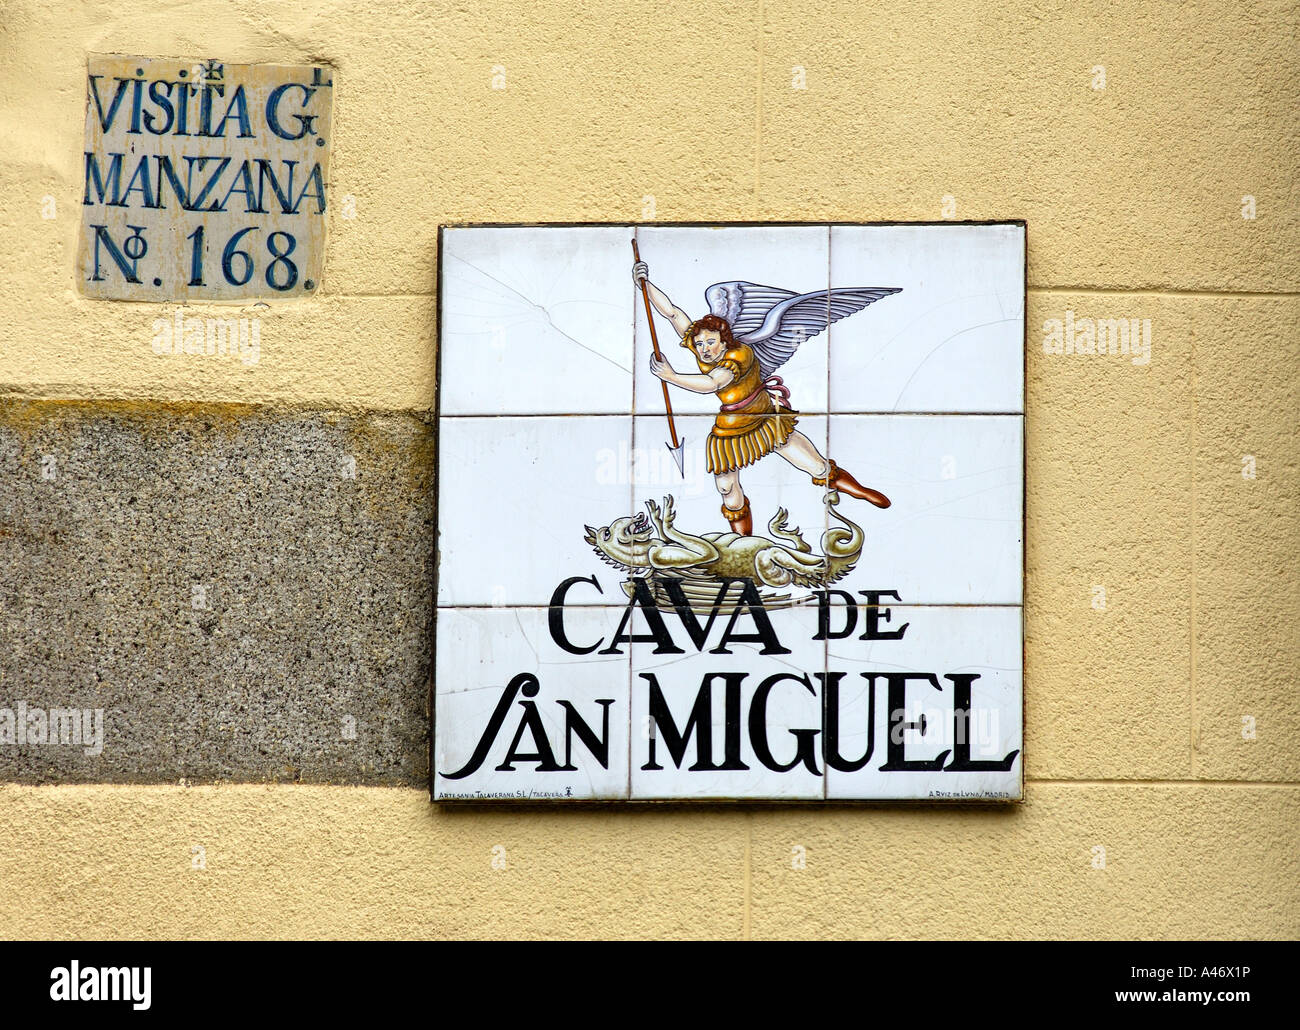 Cava de San Miguel, street sign in the old town, Madrid, Spain Stock Photo